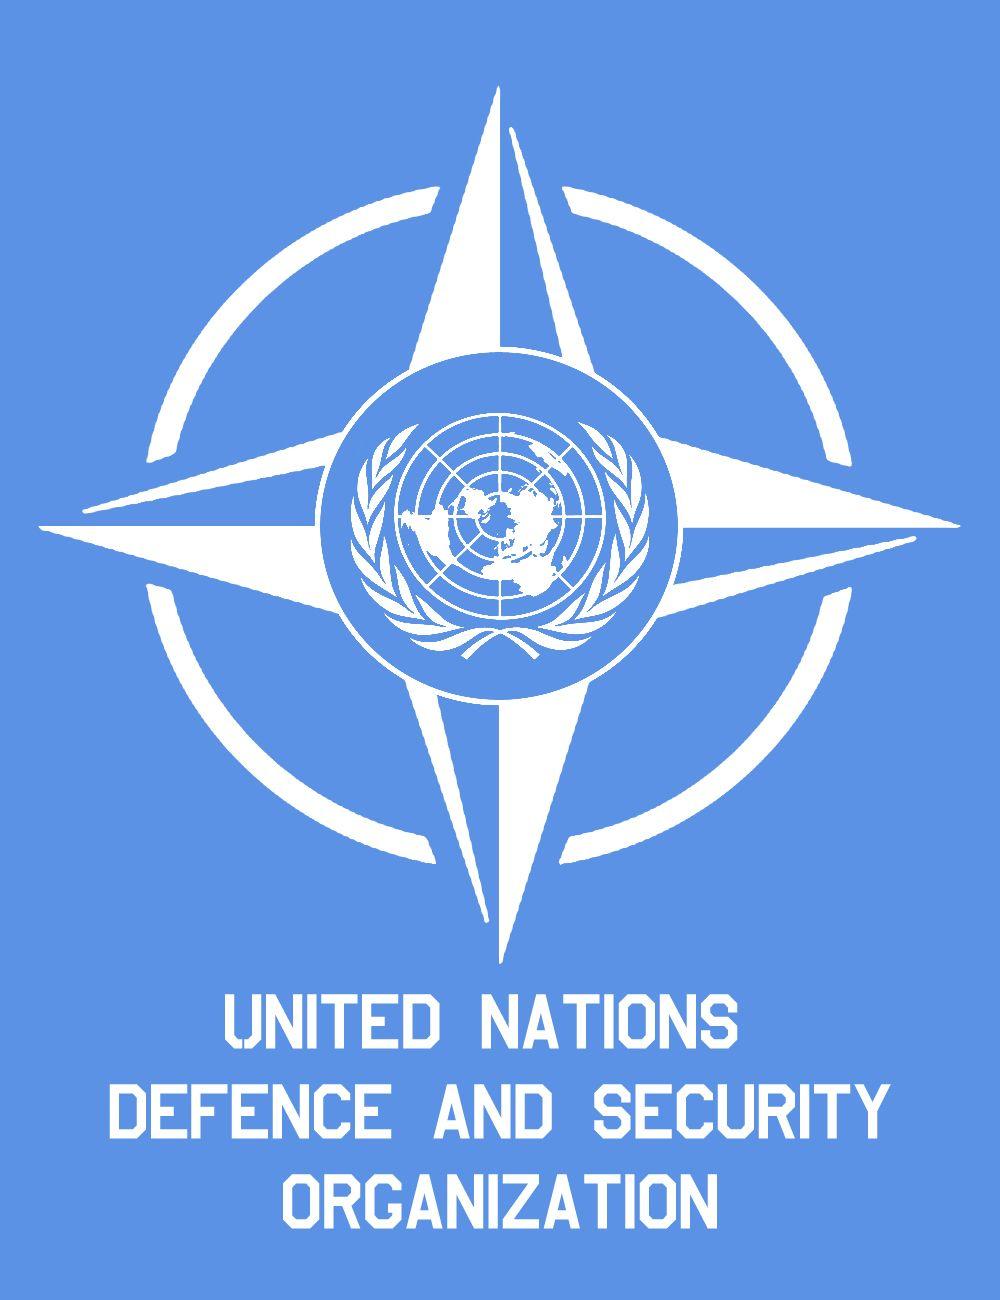 Old United Nations Logo - United Nations logo early concept art image